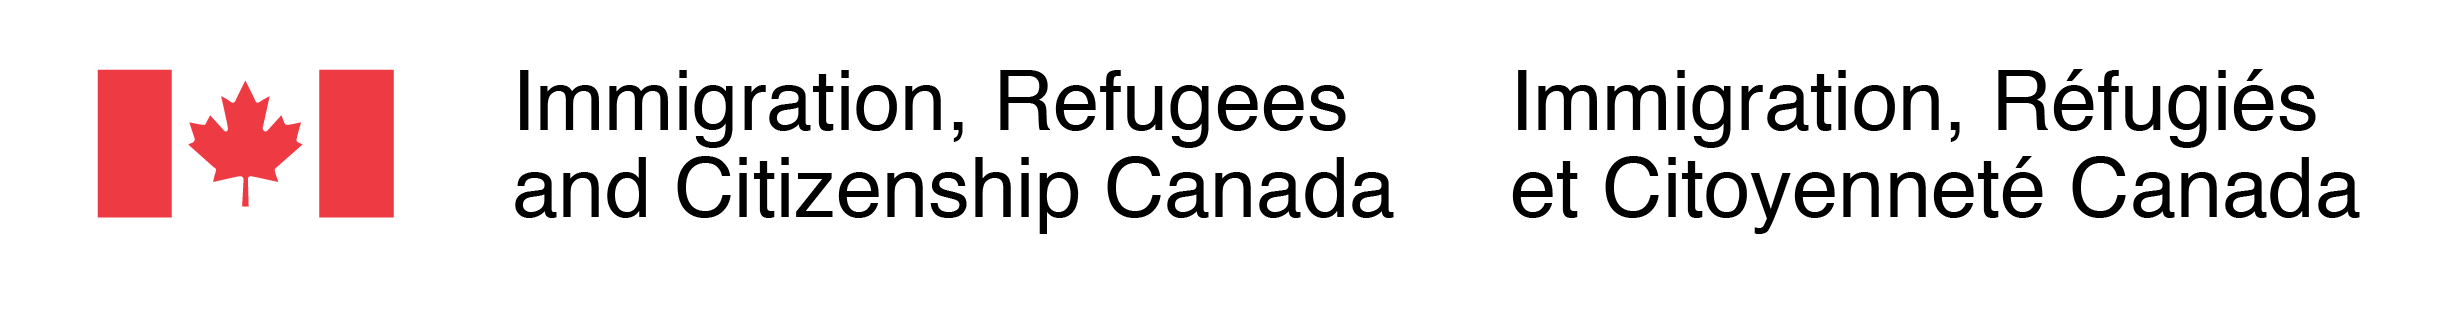 Immigration, Refugees and Citizenship Canada (IRCC)